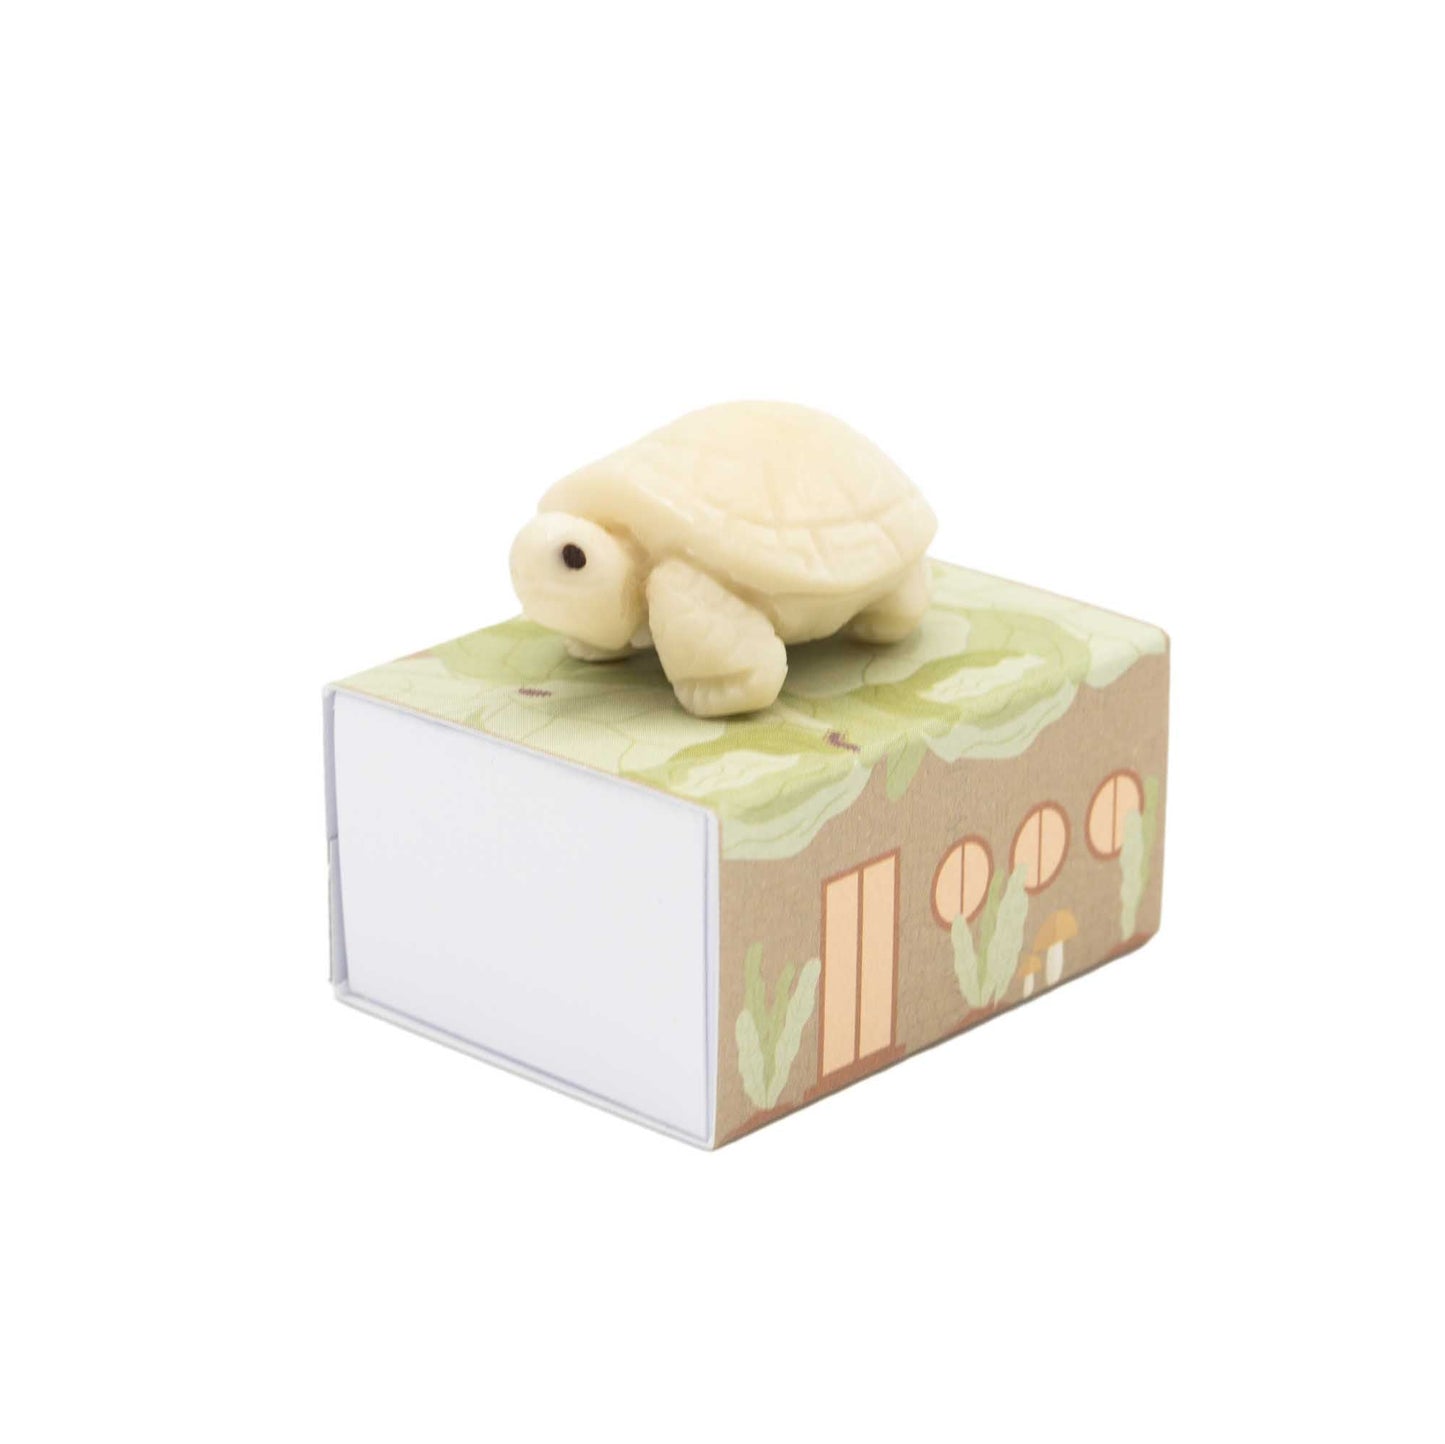 Tagua tortoise on top of the matchbox house it arrives in.